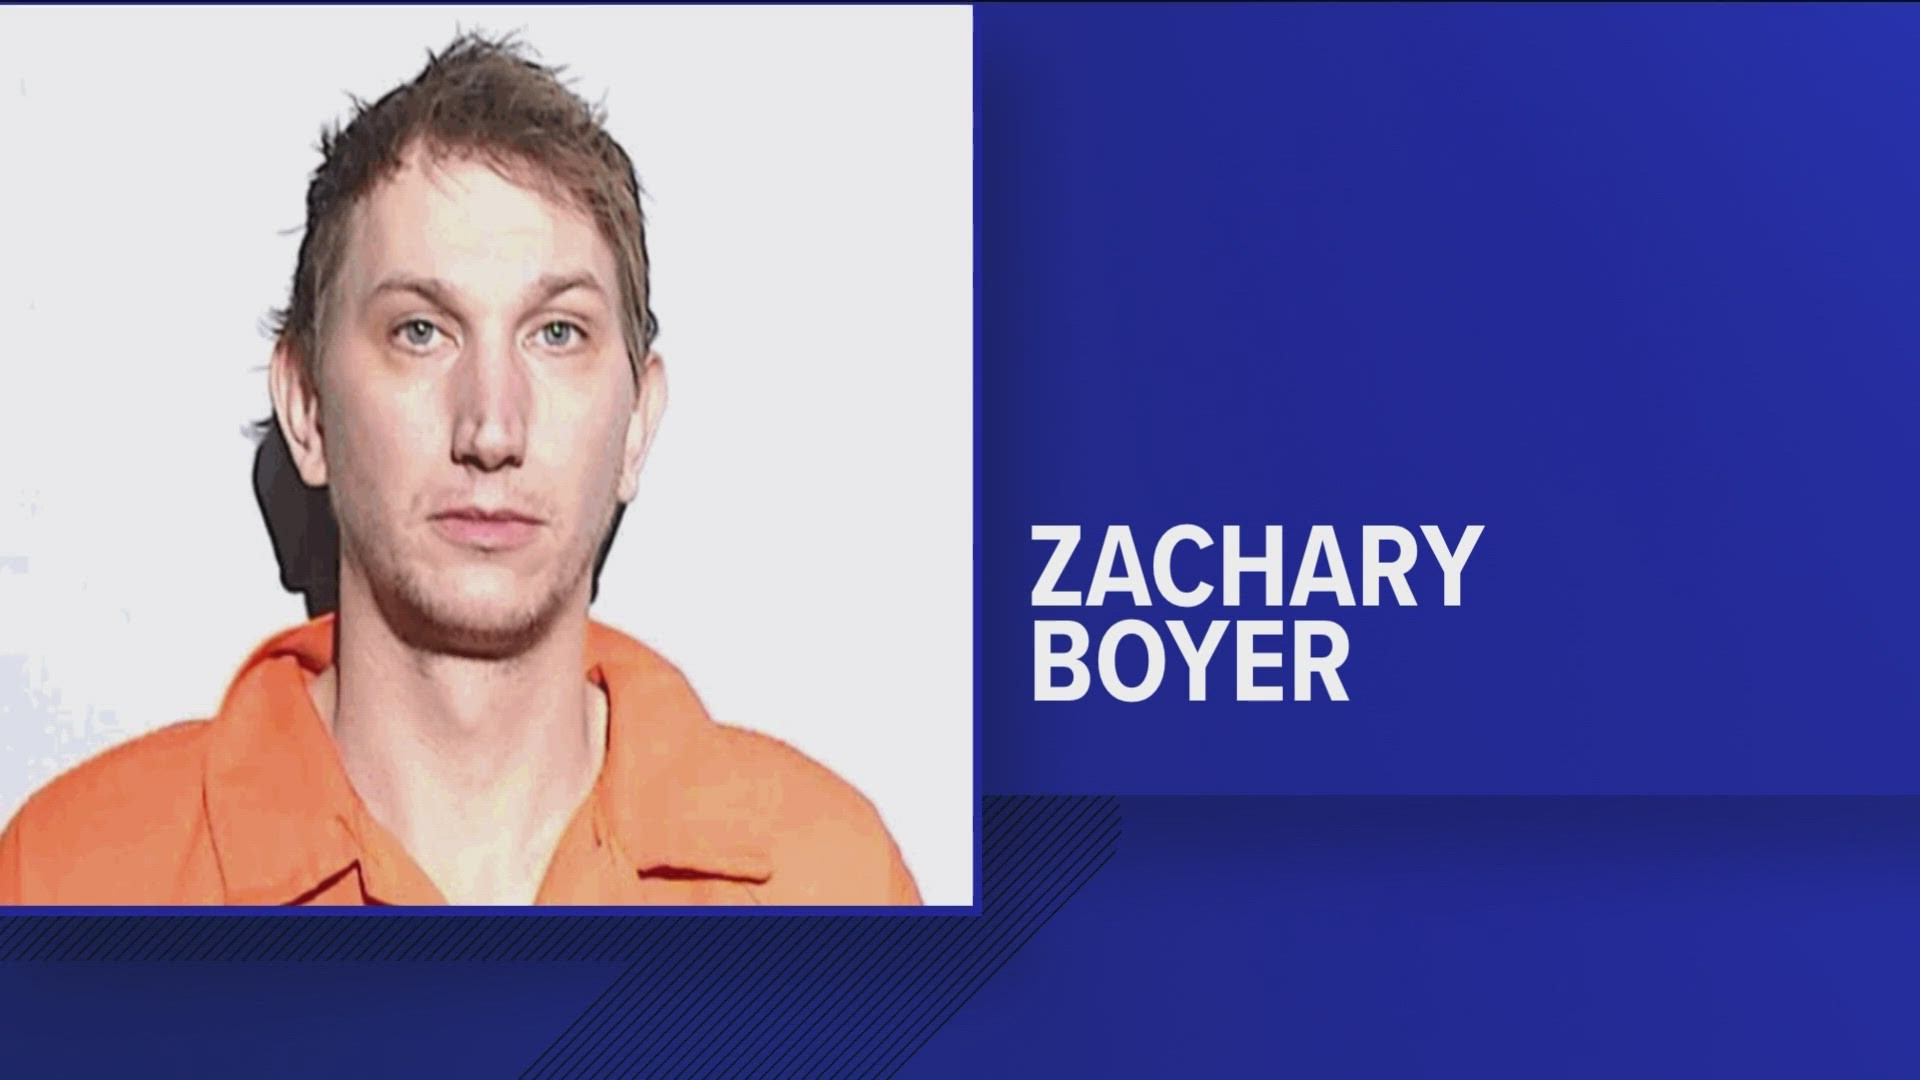 Zachary Boyer, 34, is accused of seriously injuring 76-year-old John Meeker in an altercation at the park in November, leading to his death.